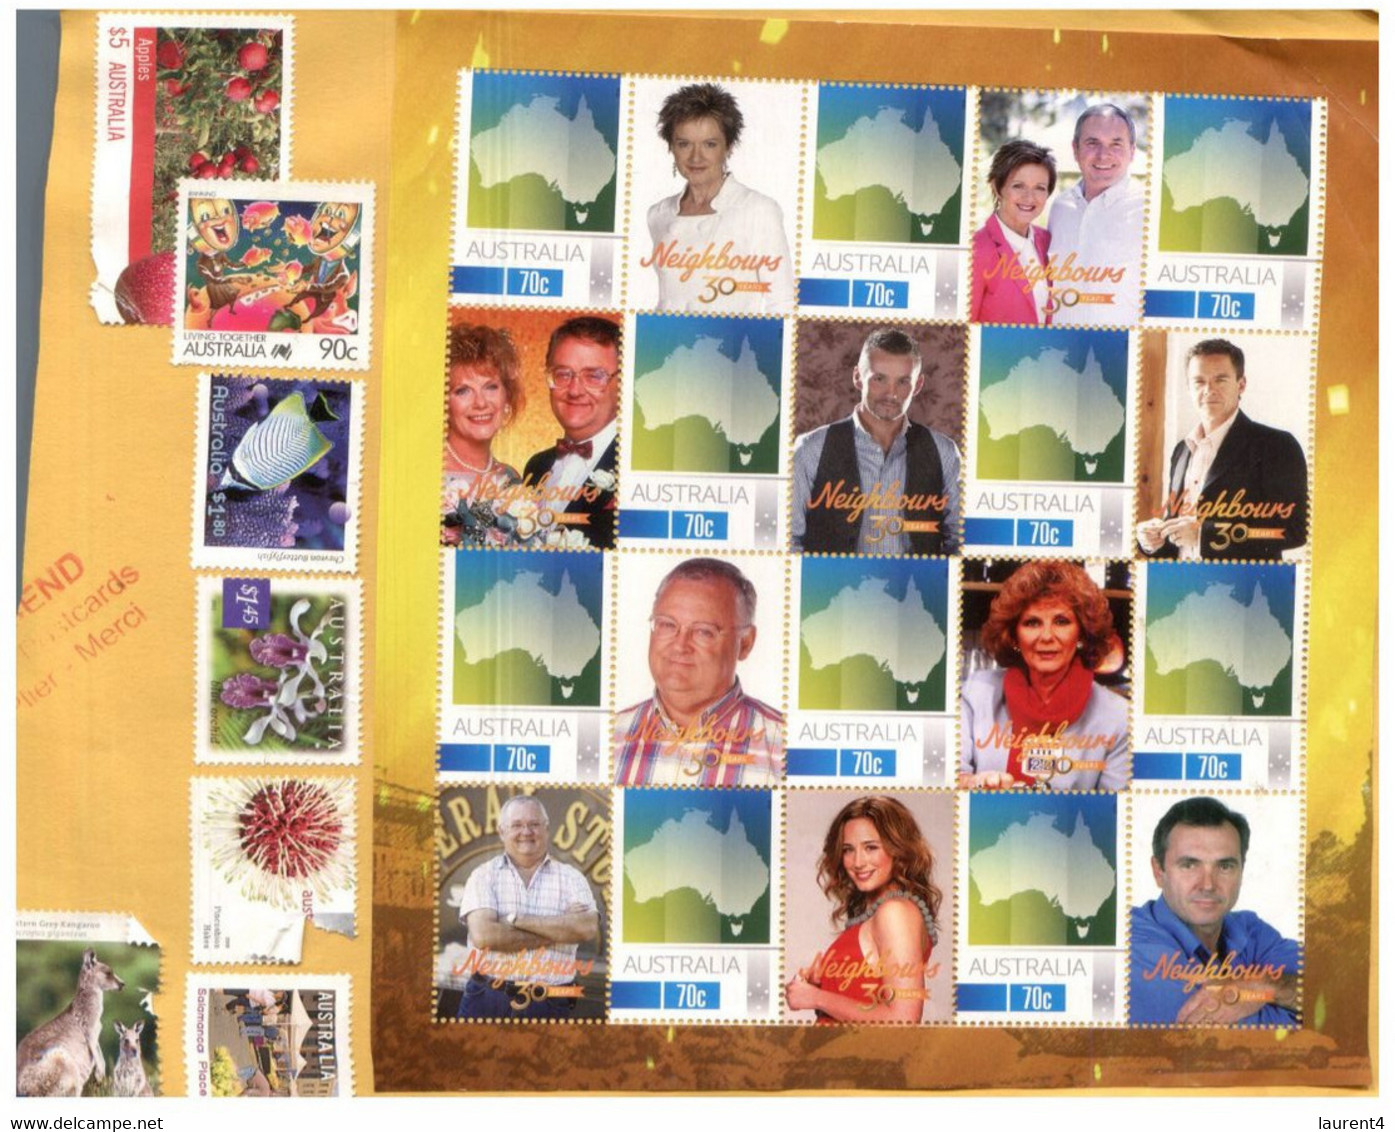 (BB 24 Large) On Paper - Personalised Stamps - Neighbours TV Show 30th Anniversary Sheet (10 Stamps) - Fogli Completi